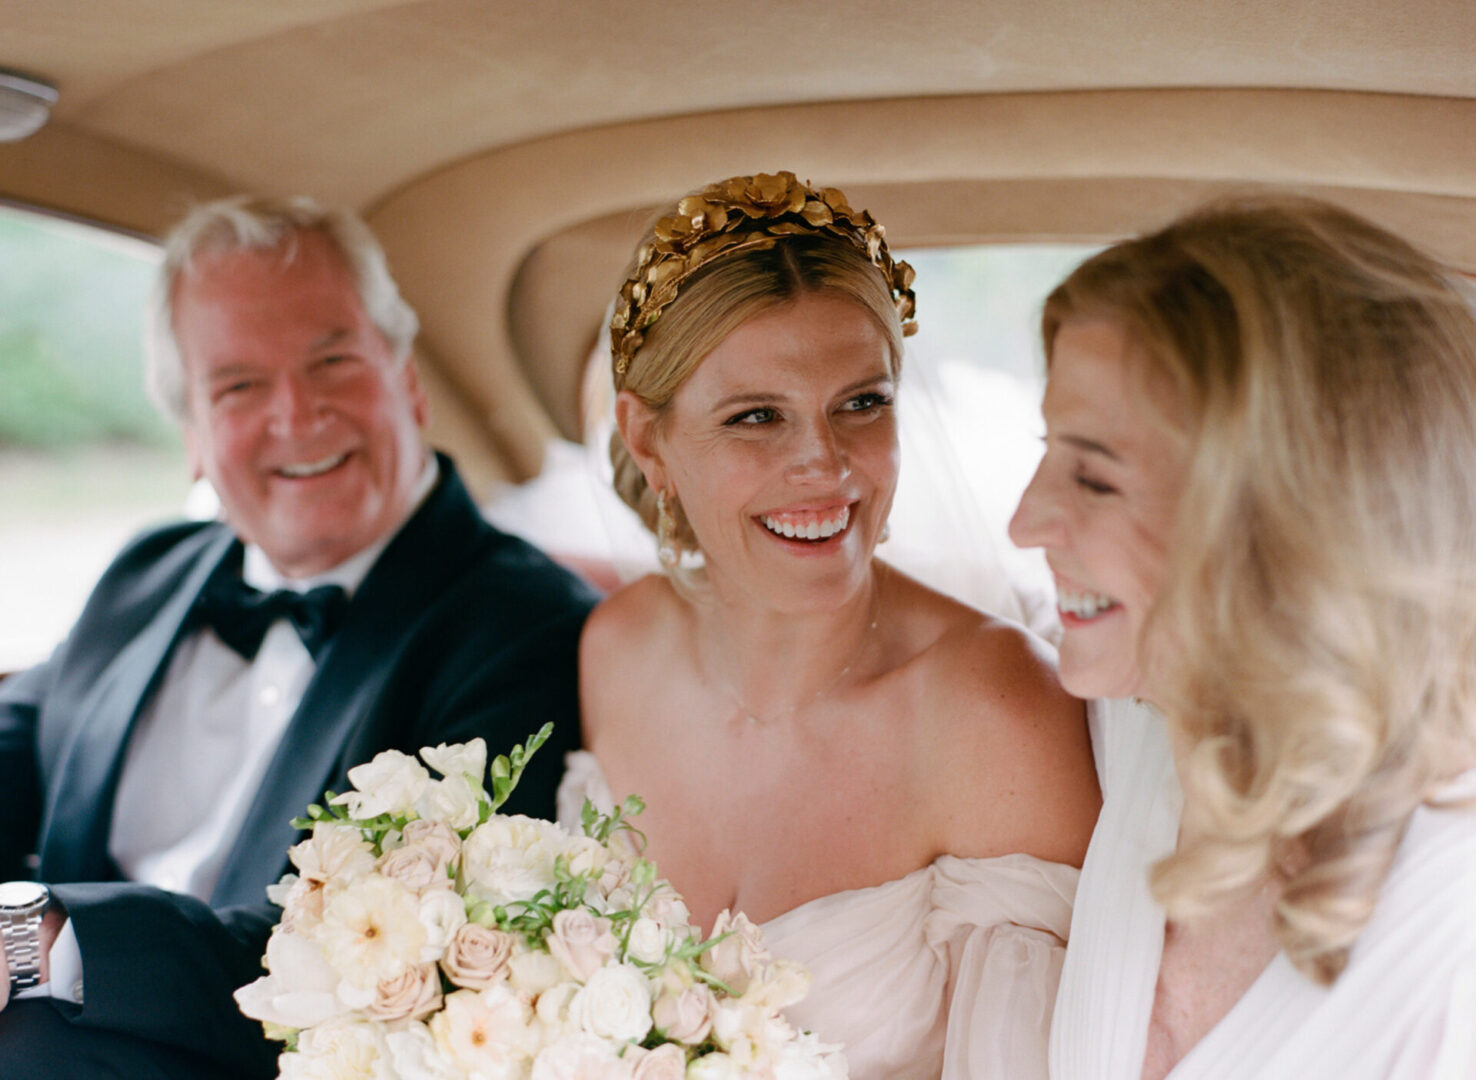 The bride seated between her parents inside the car